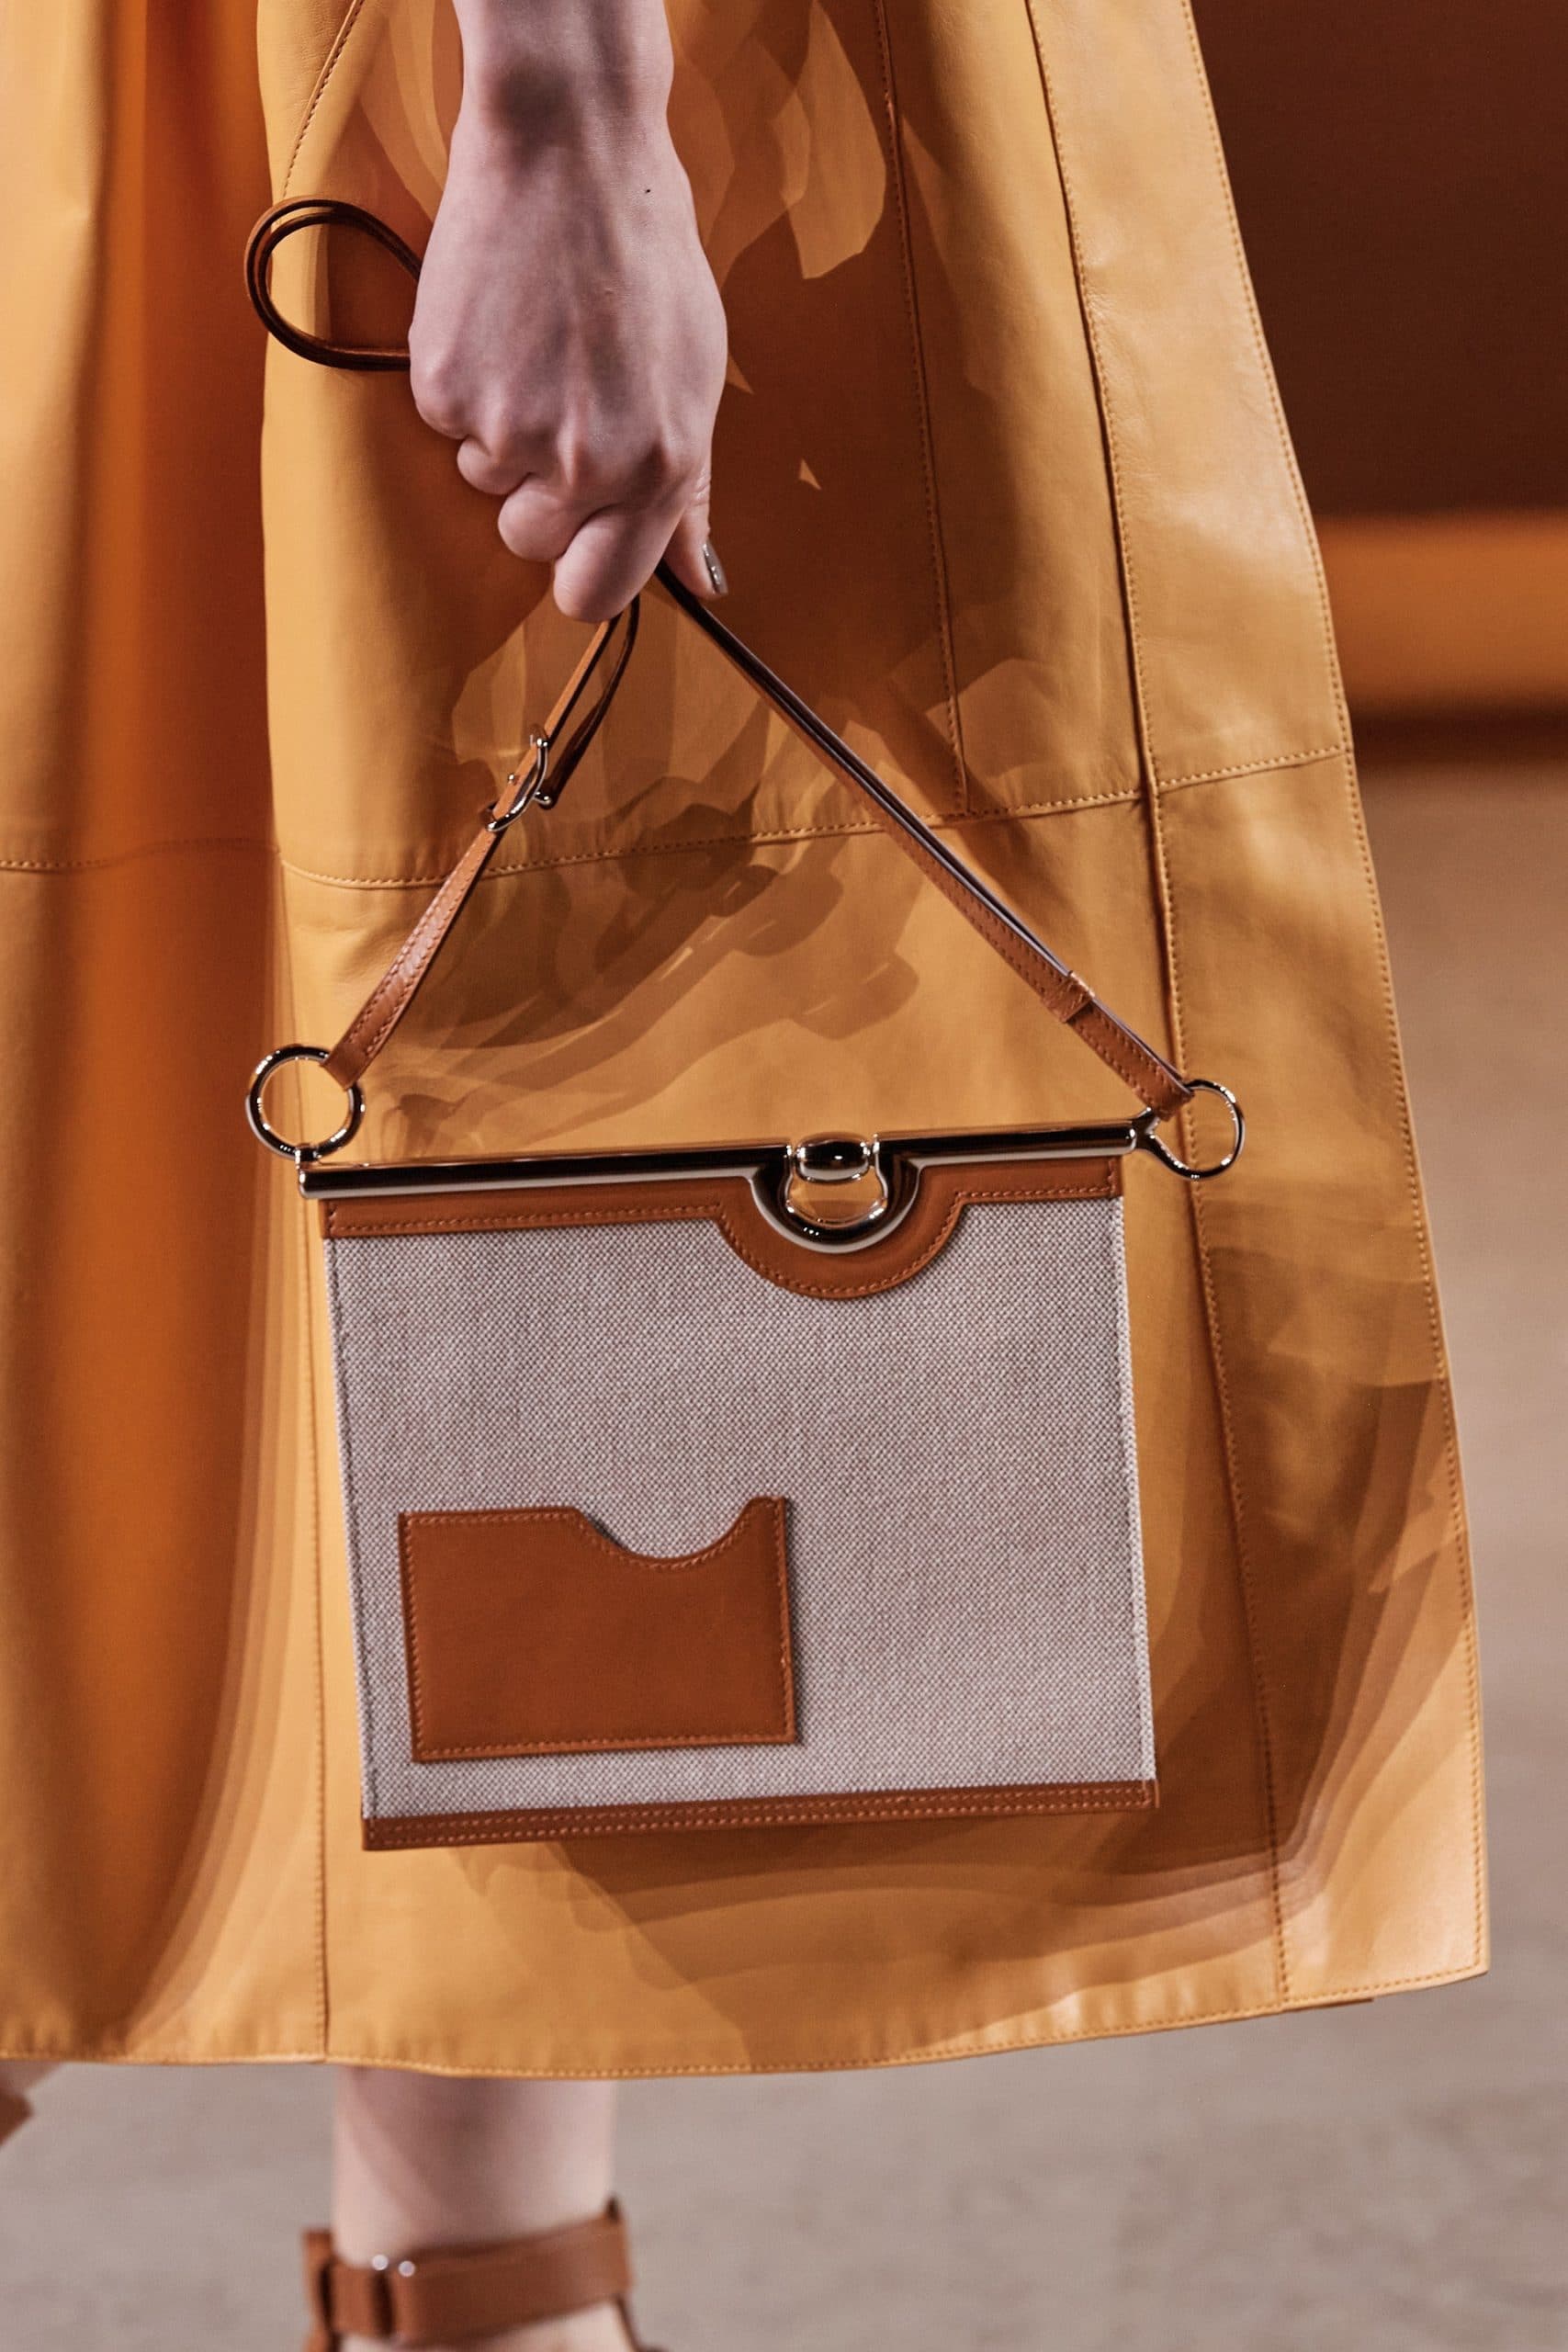 The best new bags of SS22 from Chanel, Hermes, Dior and more